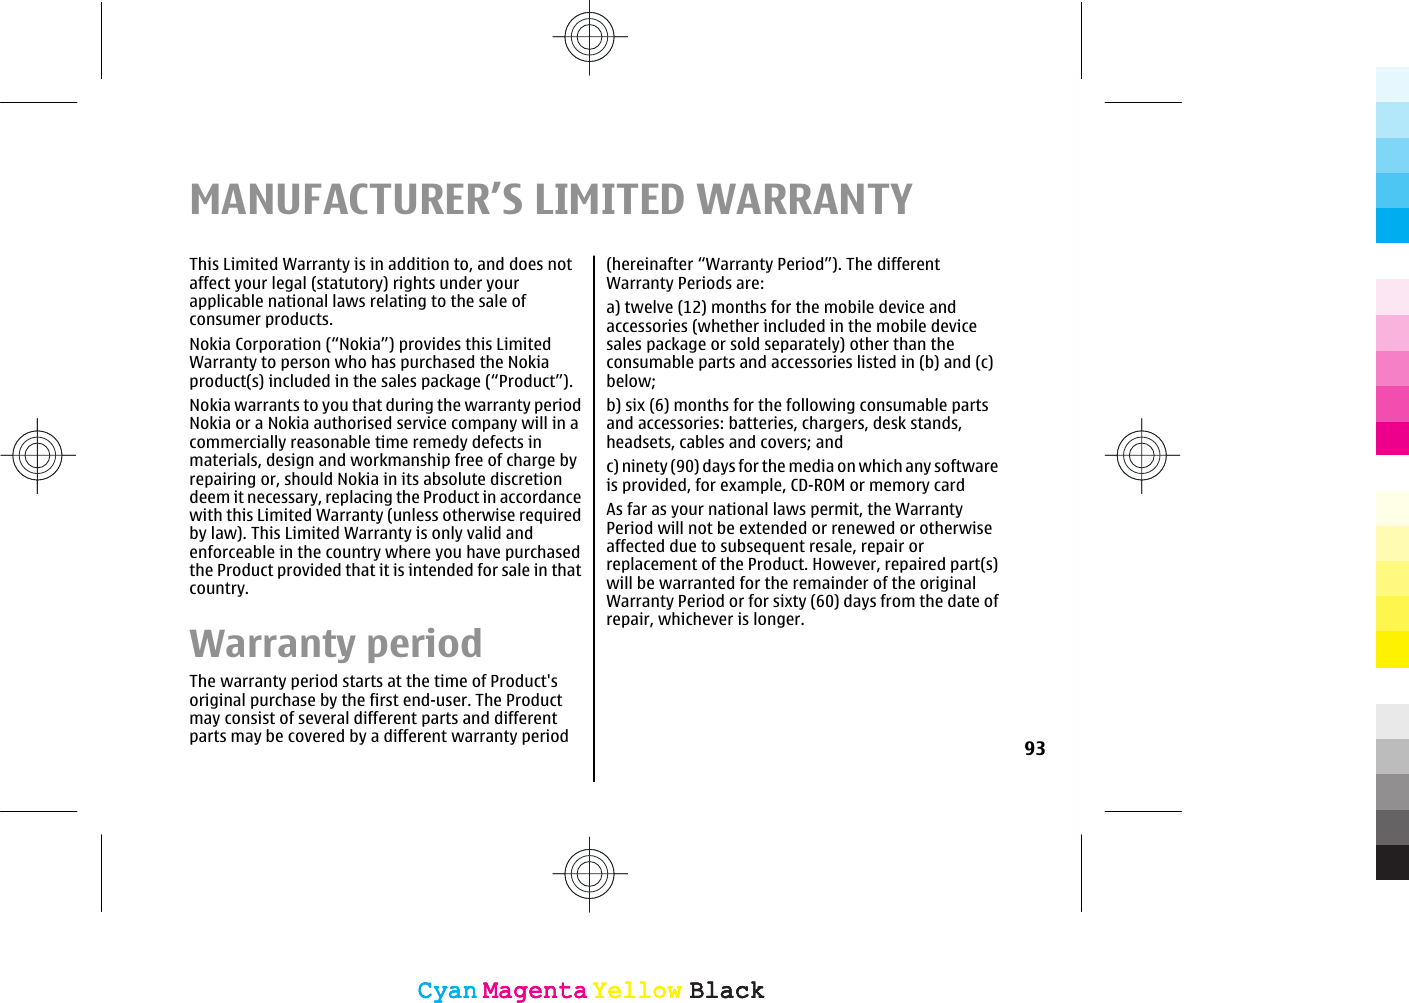 MANUFACTURER’S LIMITED WARRANTYThis Limited Warranty is in addition to, and does notaffect your legal (statutory) rights under yourapplicable national laws relating to the sale ofconsumer products.Nokia Corporation (“Nokia”) provides this LimitedWarranty to person who has purchased the Nokiaproduct(s) included in the sales package (“Product”).Nokia warrants to you that during the warranty periodNokia or a Nokia authorised service company will in acommercially reasonable time remedy defects inmaterials, design and workmanship free of charge byrepairing or, should Nokia in its absolute discretiondeem it necessary, replacing the Product in accordancewith this Limited Warranty (unless otherwise requiredby law). This Limited Warranty is only valid andenforceable in the country where you have purchasedthe Product provided that it is intended for sale in thatcountry.Warranty periodThe warranty period starts at the time of Product&apos;soriginal purchase by the first end-user. The Productmay consist of several different parts and differentparts may be covered by a different warranty period(hereinafter “Warranty Period”). The differentWarranty Periods are:a) twelve (12) months for the mobile device andaccessories (whether included in the mobile devicesales package or sold separately) other than theconsumable parts and accessories listed in (b) and (c)below;b) six (6) months for the following consumable partsand accessories: batteries, chargers, desk stands,headsets, cables and covers; andc) ninety (90) days for the media on which any softwareis provided, for example, CD-ROM or memory cardAs far as your national laws permit, the WarrantyPeriod will not be extended or renewed or otherwiseaffected due to subsequent resale, repair orreplacement of the Product. However, repaired part(s)will be warranted for the remainder of the originalWarranty Period or for sixty (60) days from the date ofrepair, whichever is longer.93CyanCyanMagentaMagentaYellowYellowBlackBlackCyanCyanMagentaMagentaYellowYellowBlackBlack